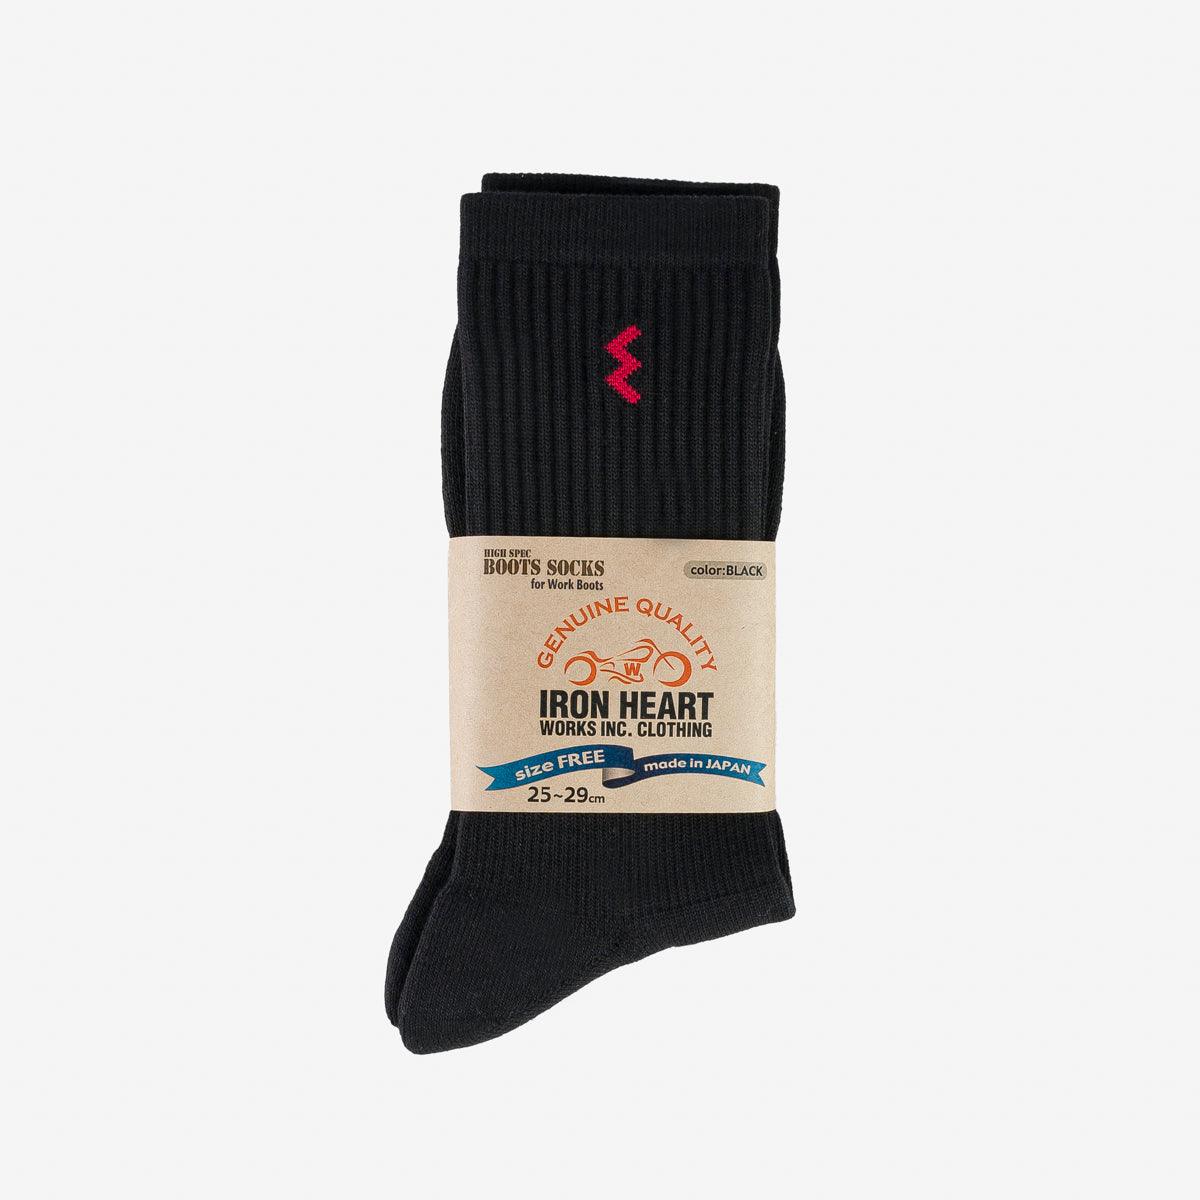 Image showing the IHG-030-BLK - Iron Heart Boot Socks - Black which is a Socks described by the following info Footwear, Iron Heart, Released, Socks and sold on the IRON HEART GERMANY online store